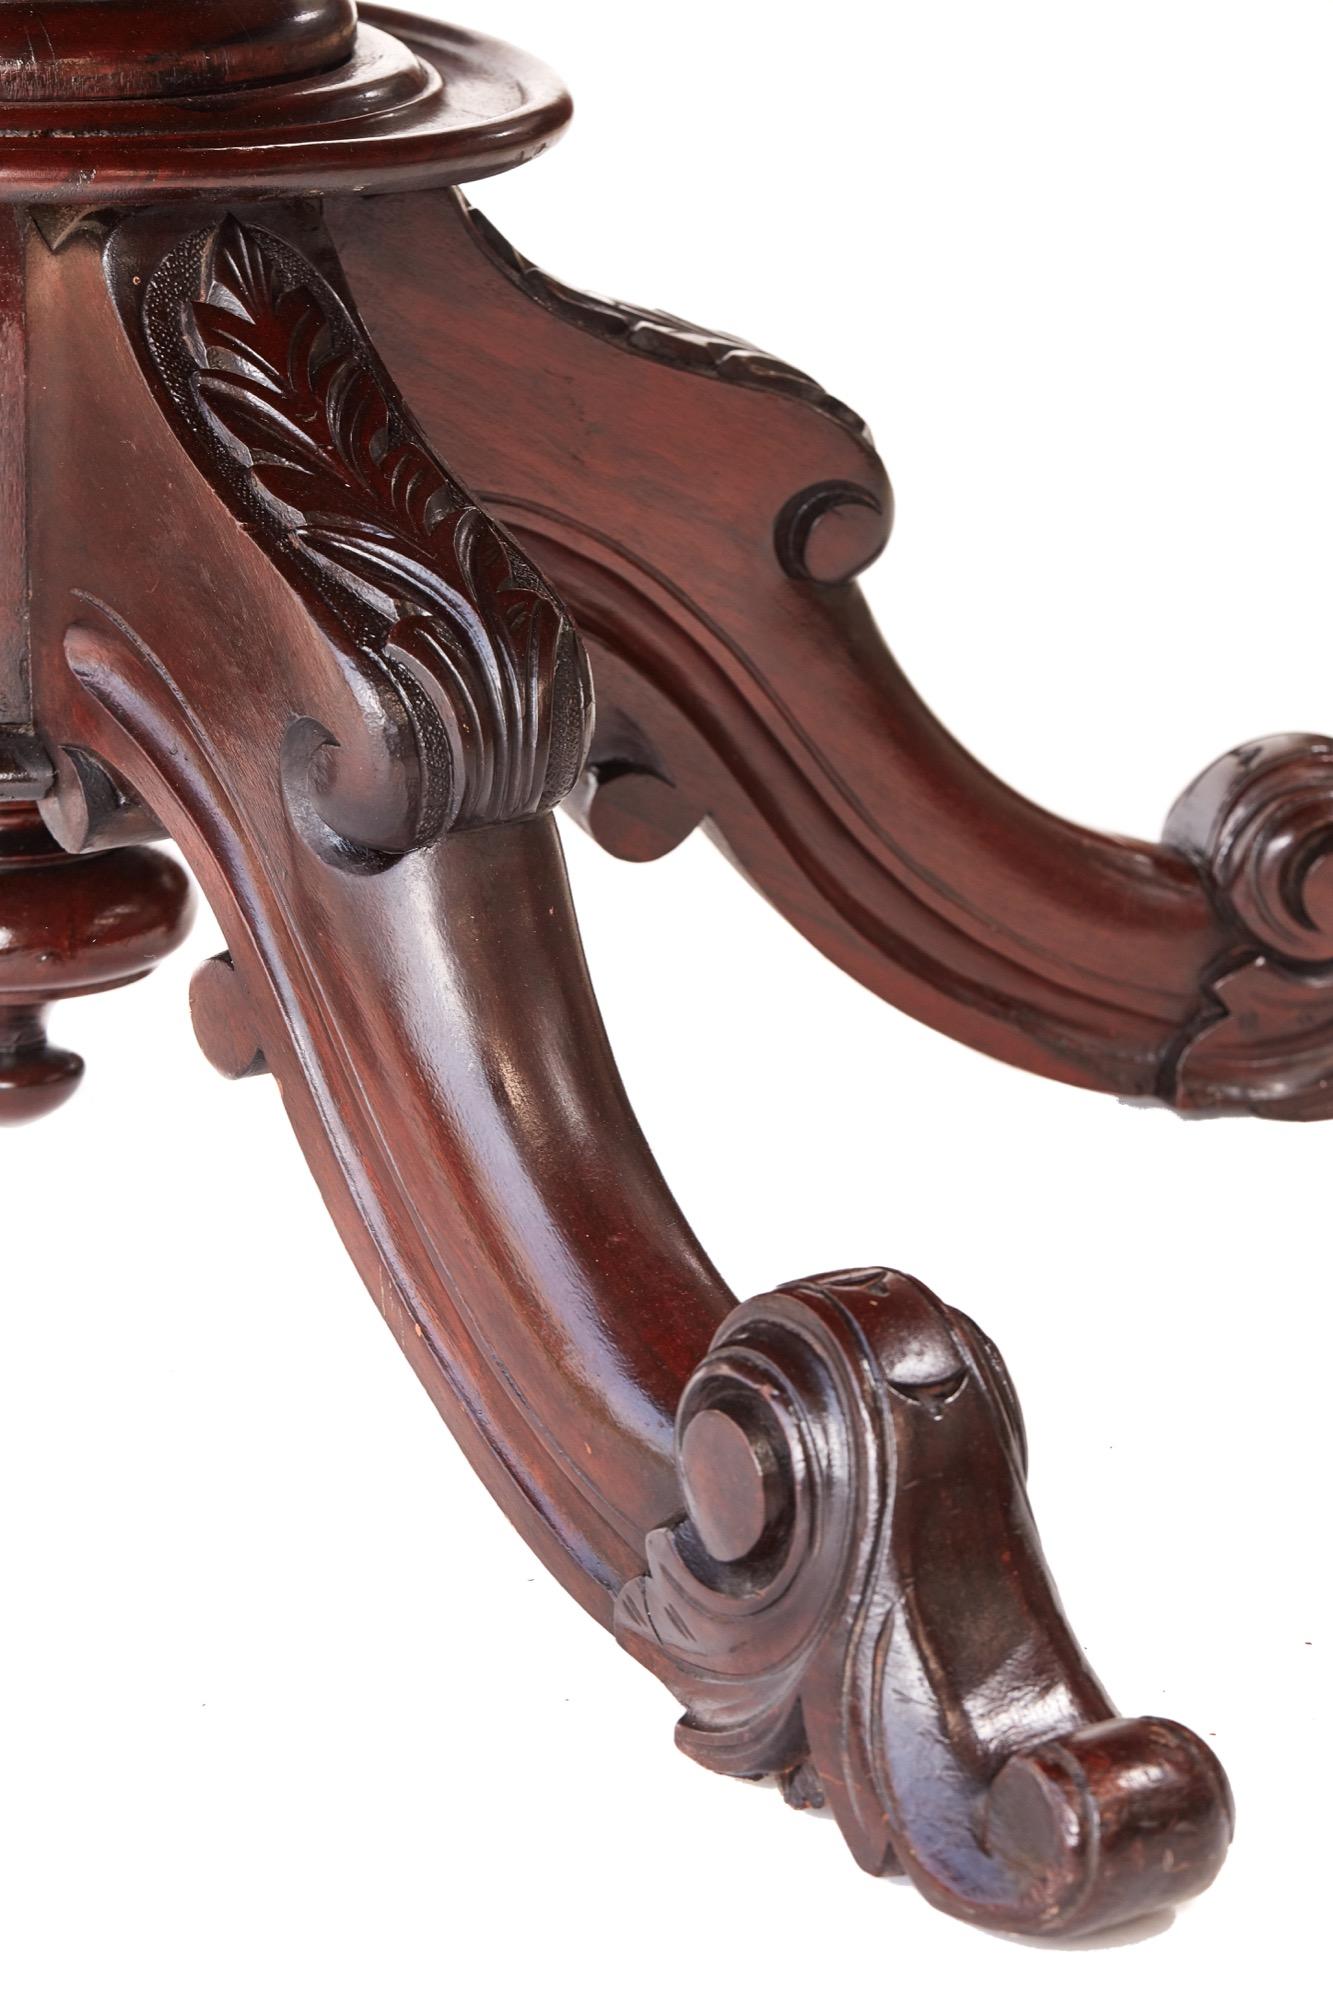 Quality Victorian oavl mahogany centre table, having a lovely oval mahogany top with a thumb moulded edge, the base having a carved shaped centre column supported on four carved shaped cabriole legs
Lovely color and condition
Measures: 55